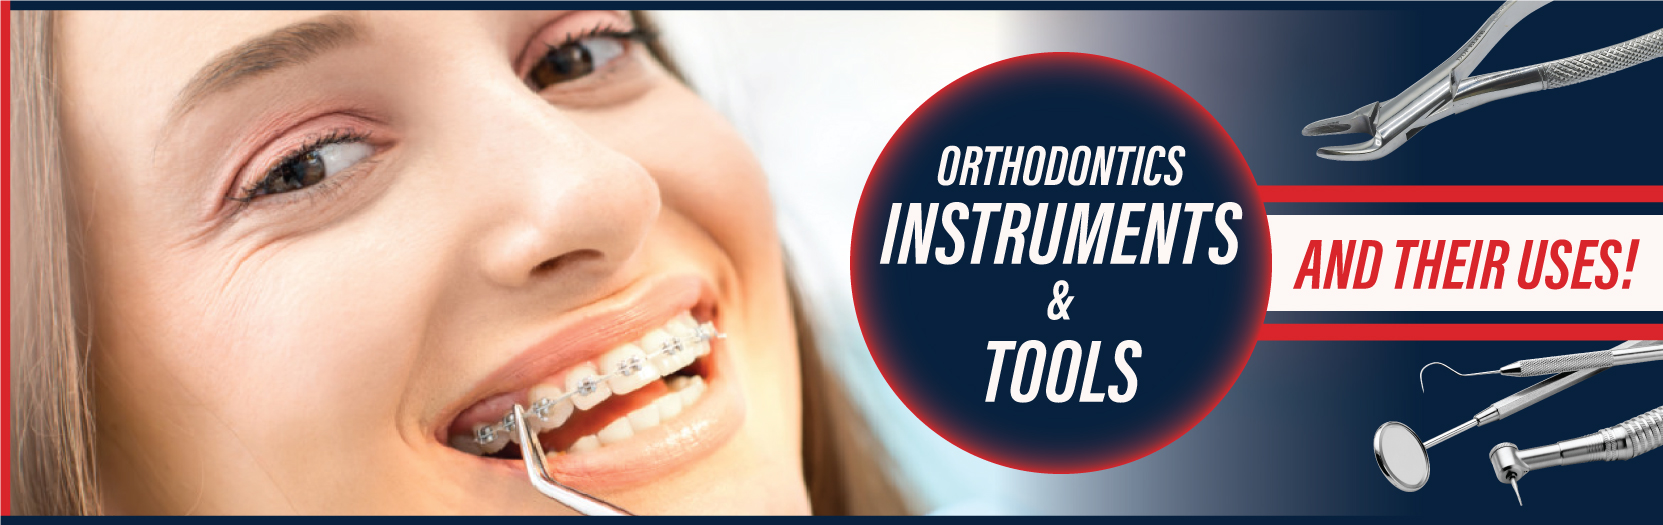 Orthodontic instruments and Tools and their uses - DDP Elite USA